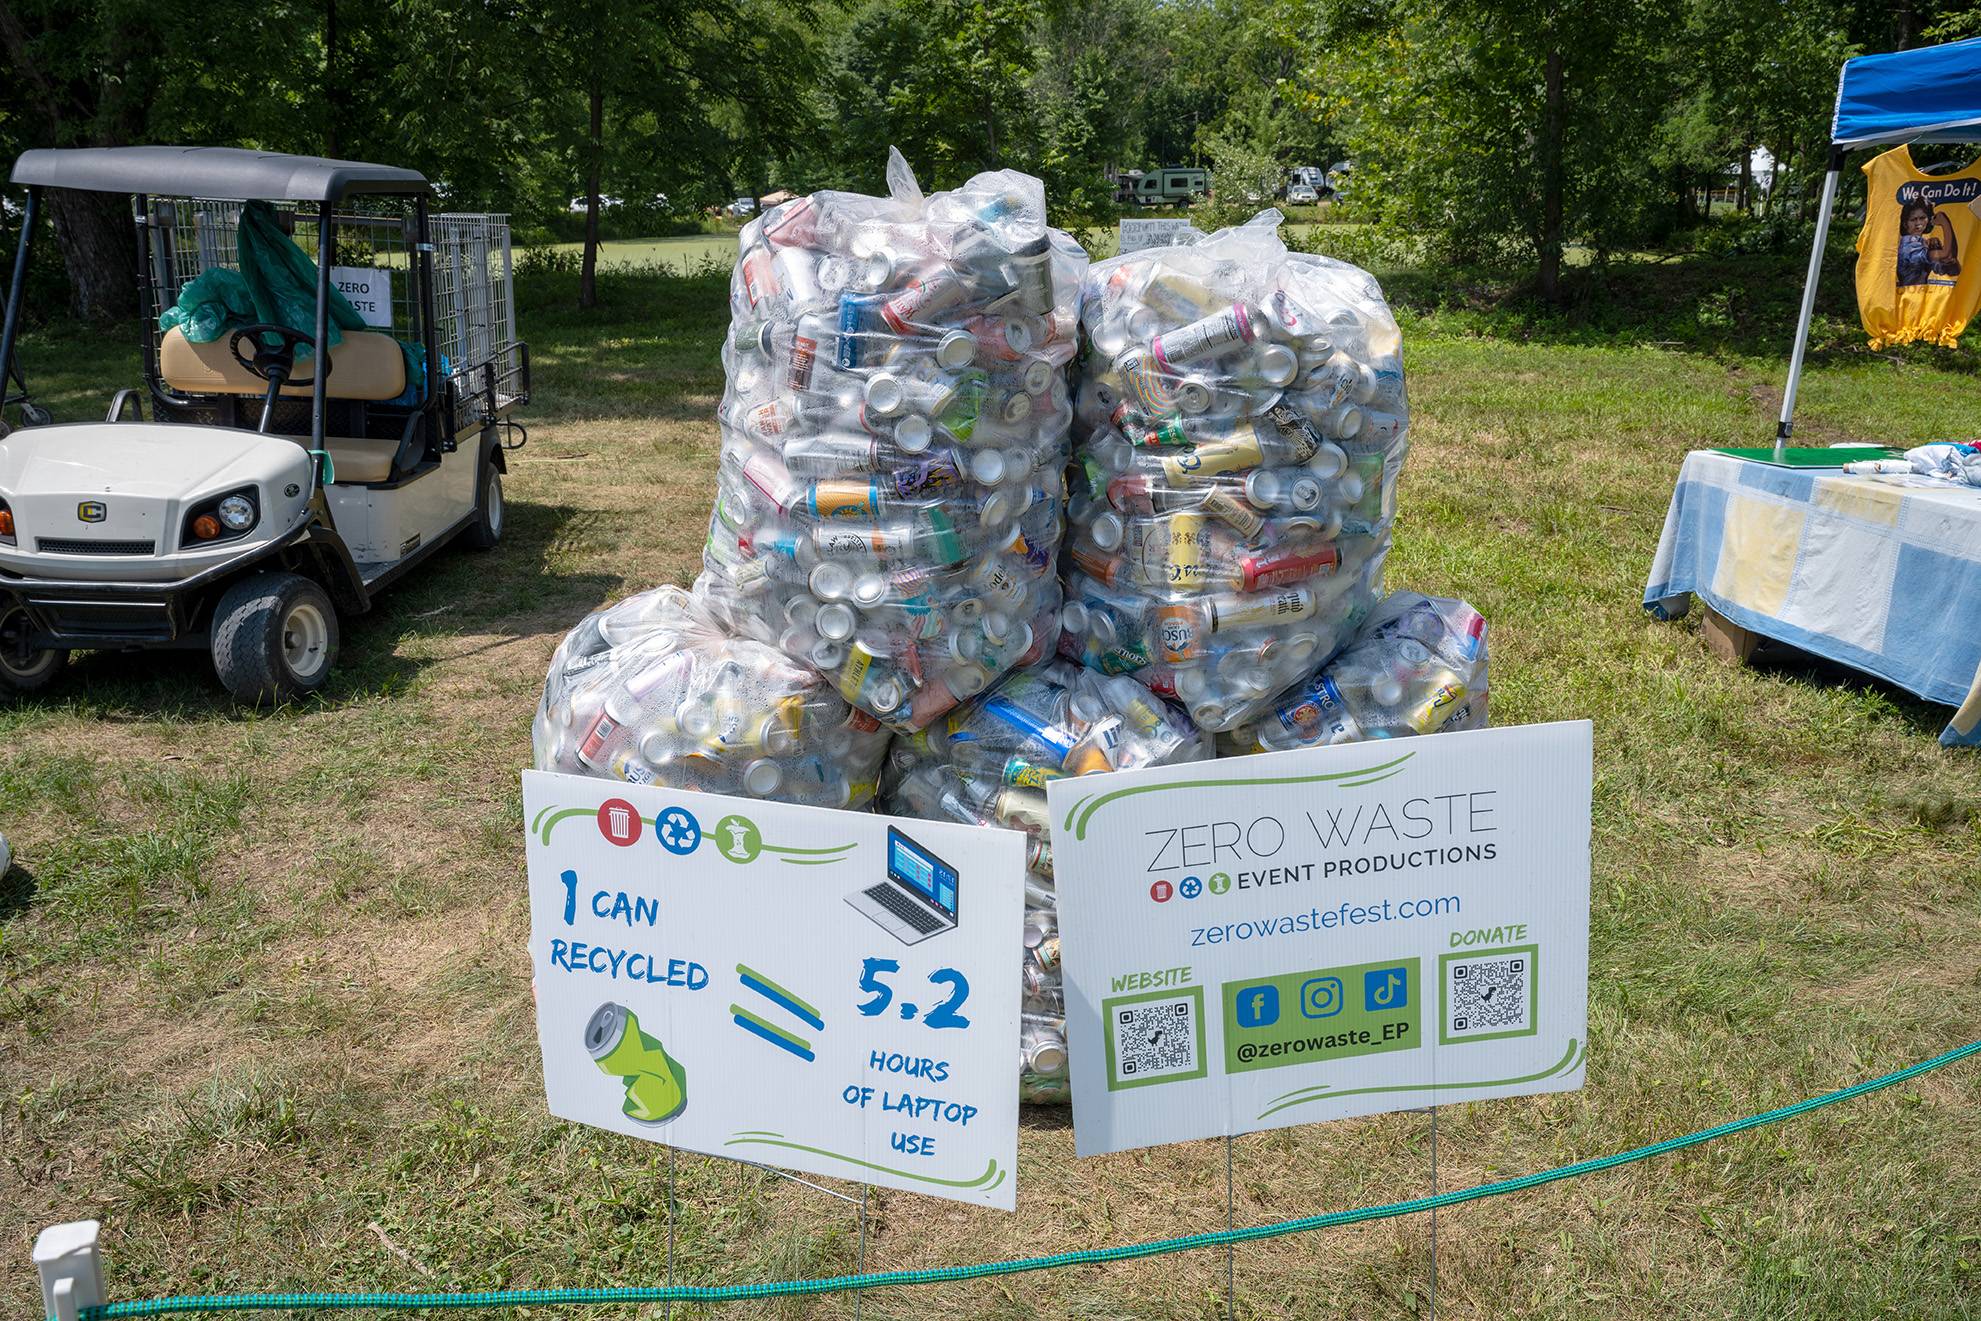 NMF operates on “Zero Waste” principles, aiming to divert 90% of materials used during the festival to be reused, composted, or recycled. 